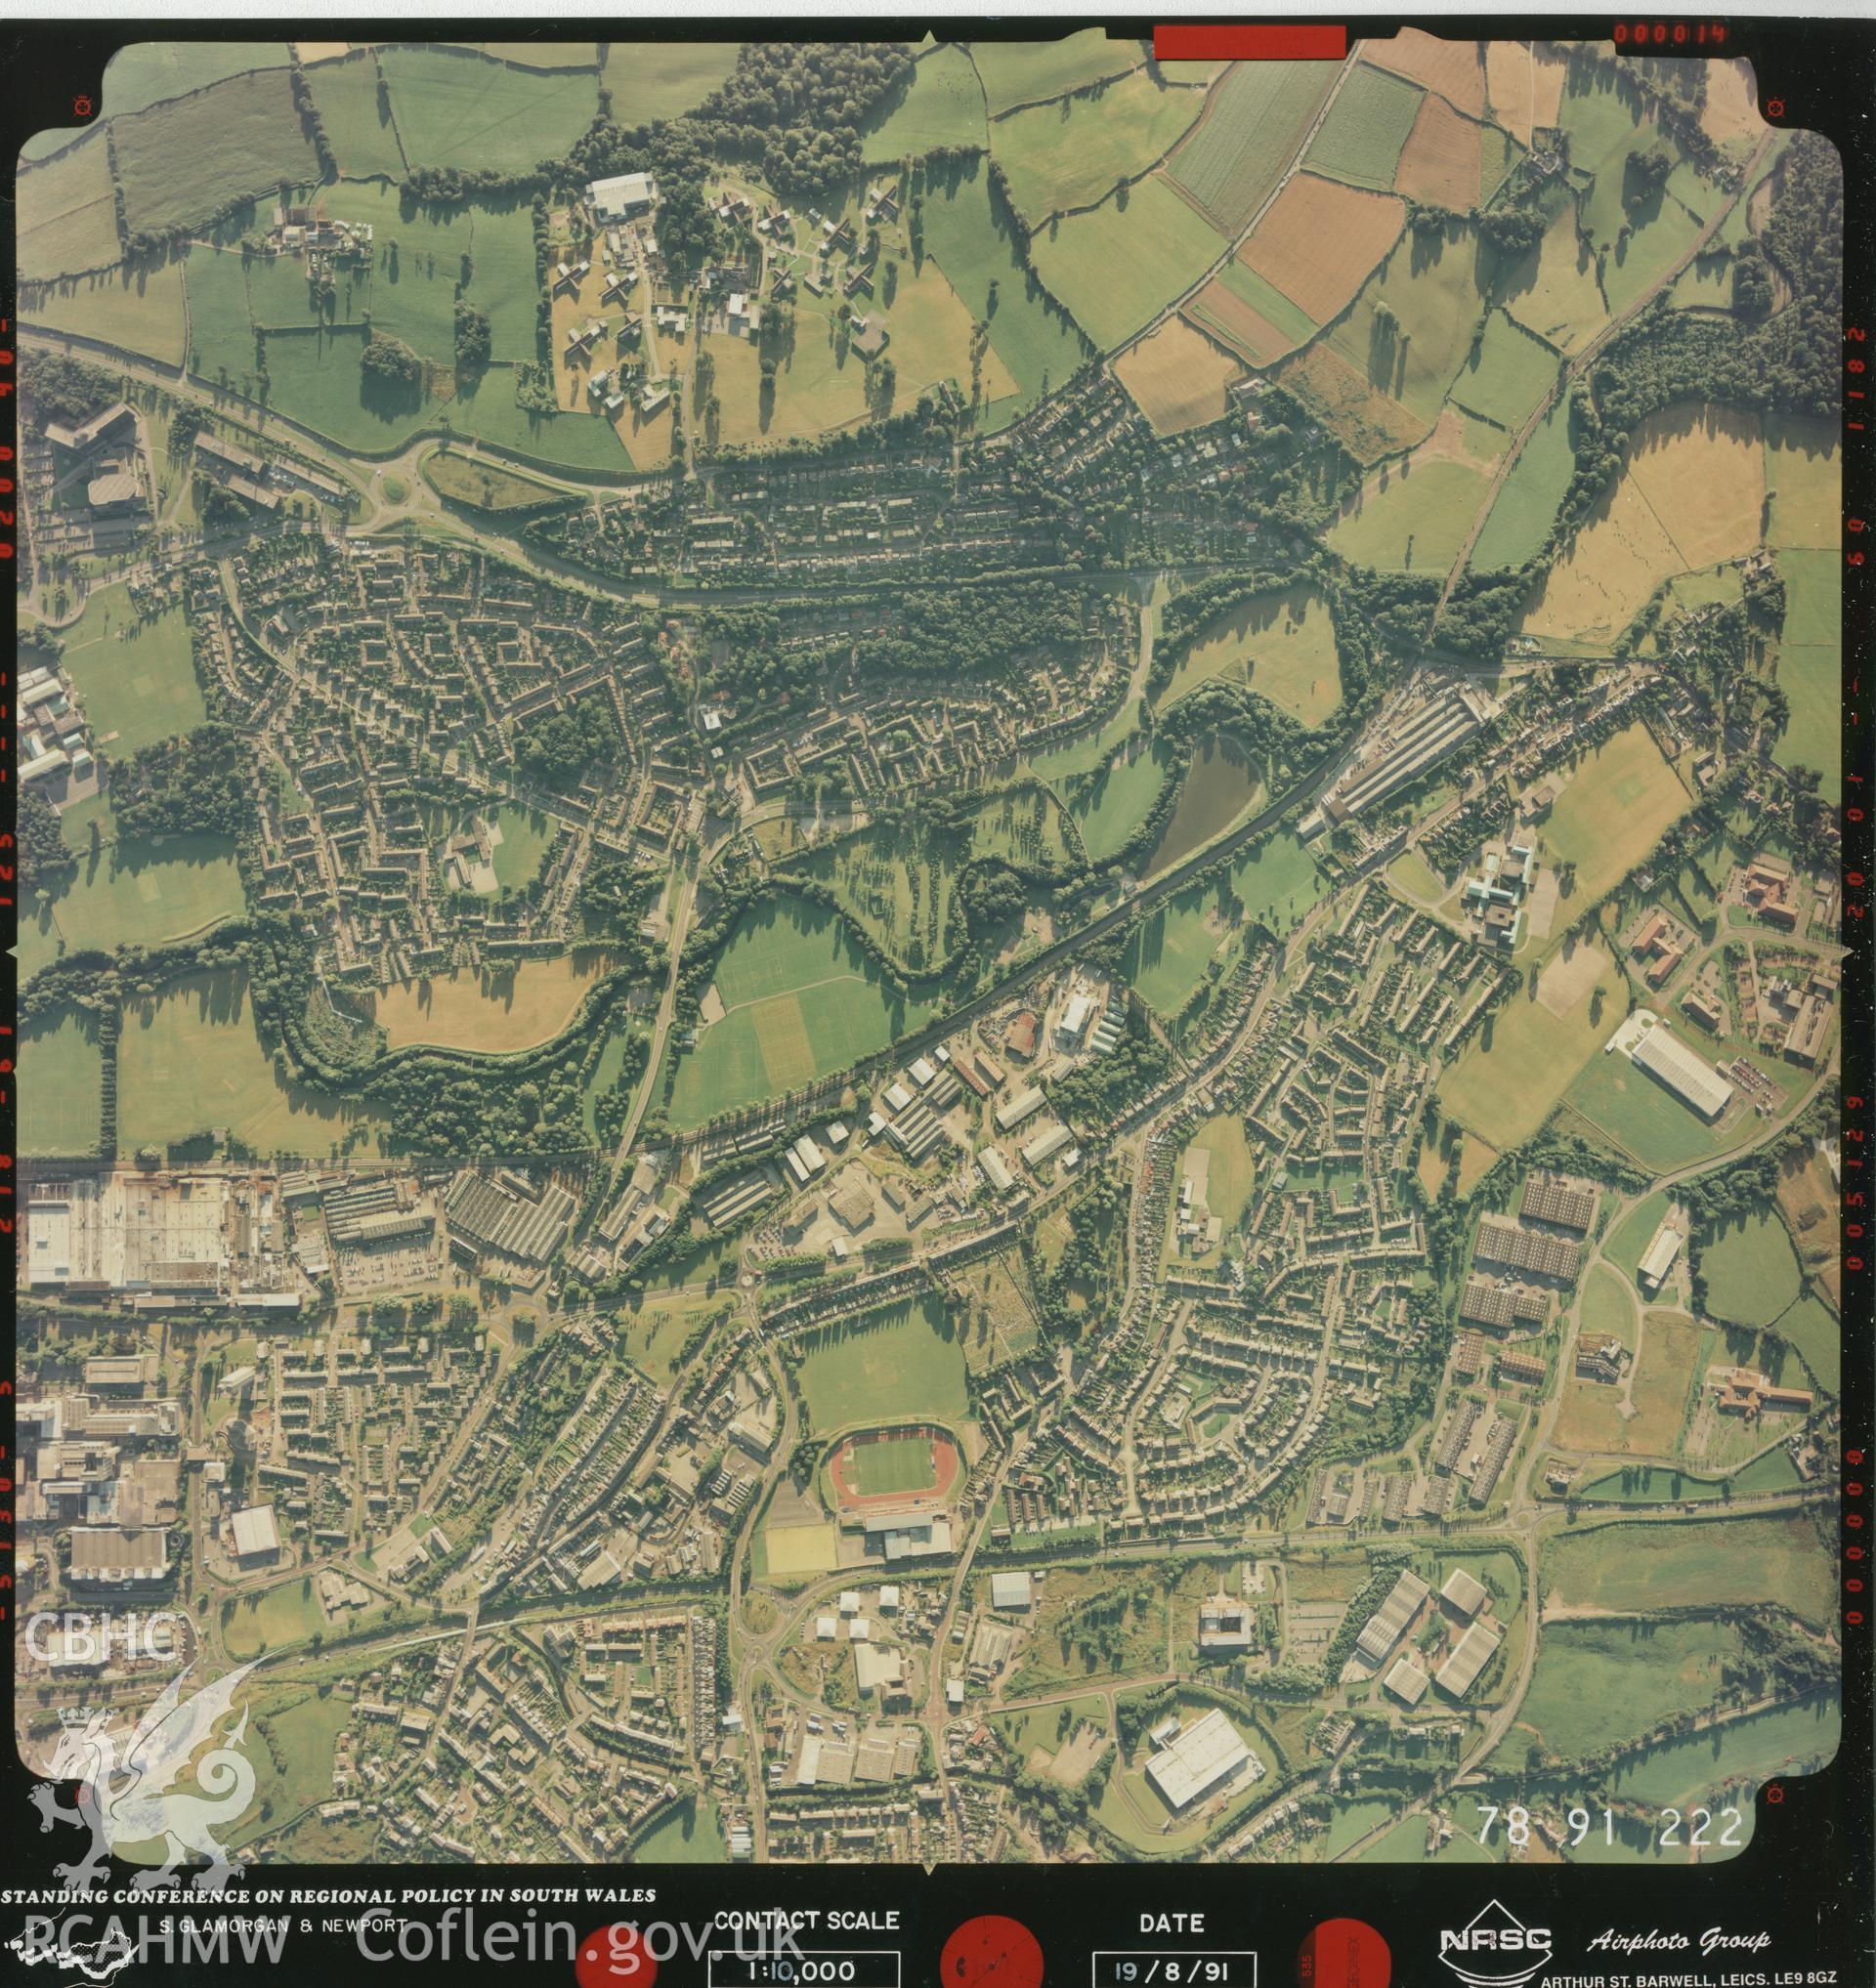 Colour aerial photograph of Cwmbran, taken on 19th August 1991. Included as part of Archaeology Wales' desk based assessment of former Llantarnam Community Primary School, Croeswen, Oakfield, Cwmbran, conducted in 2017.